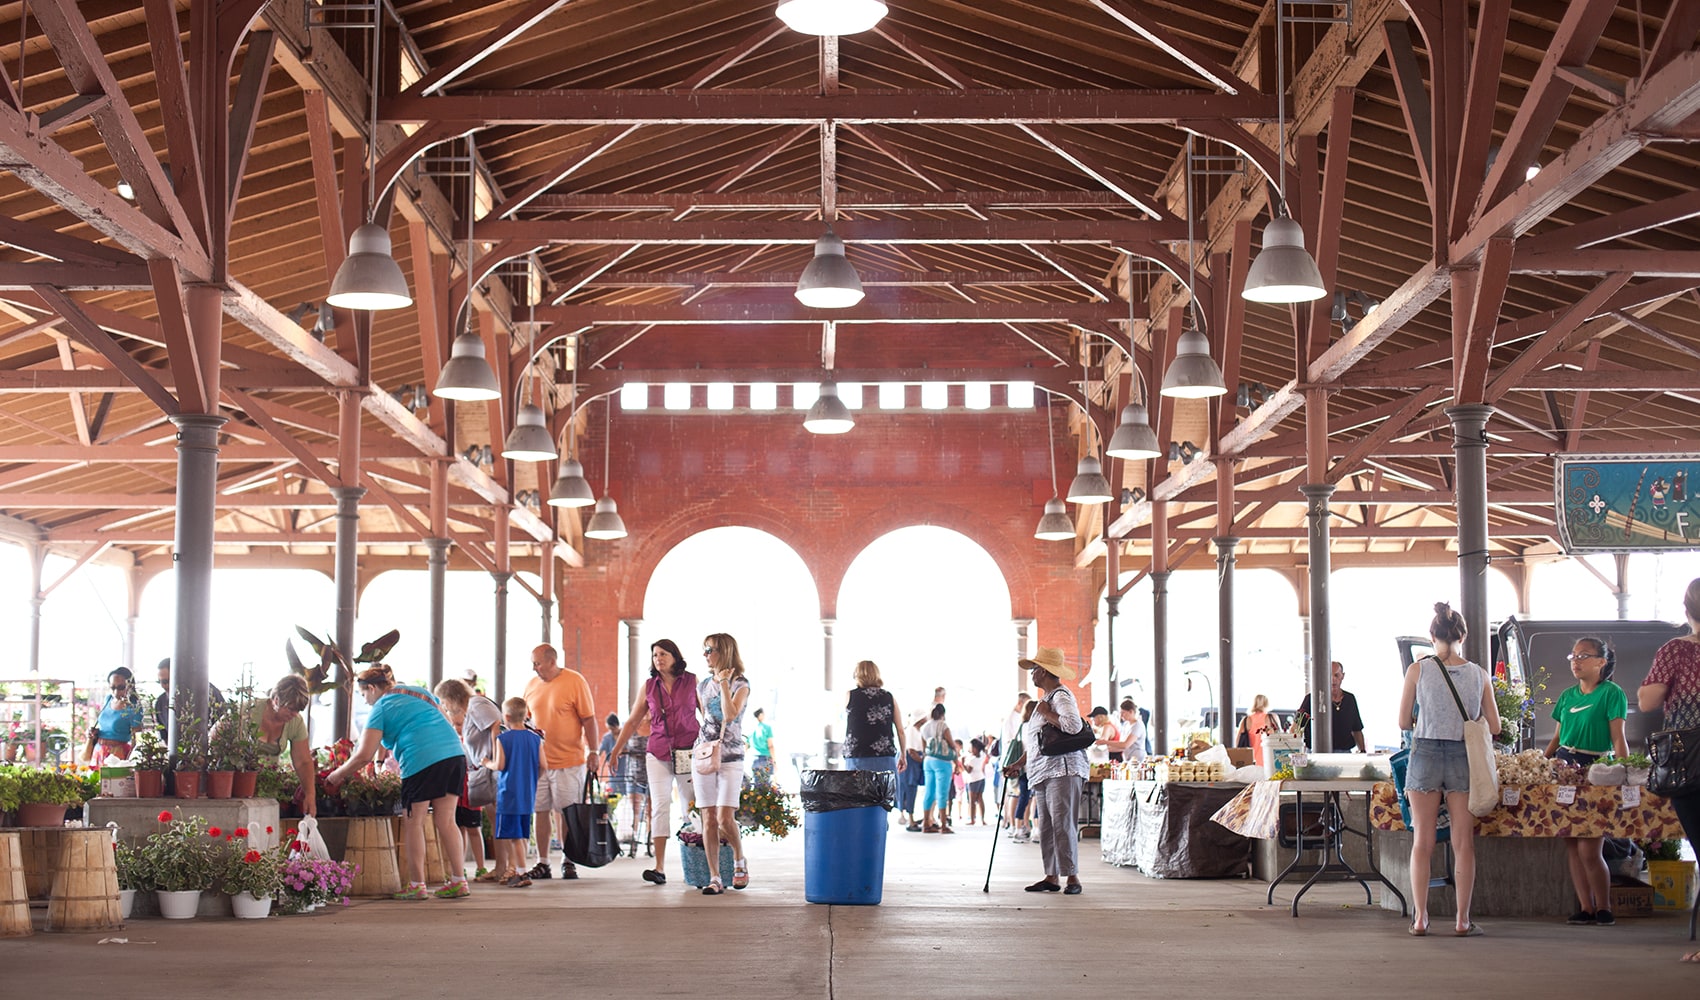 the wooden structure of the Detroit Farmers Market